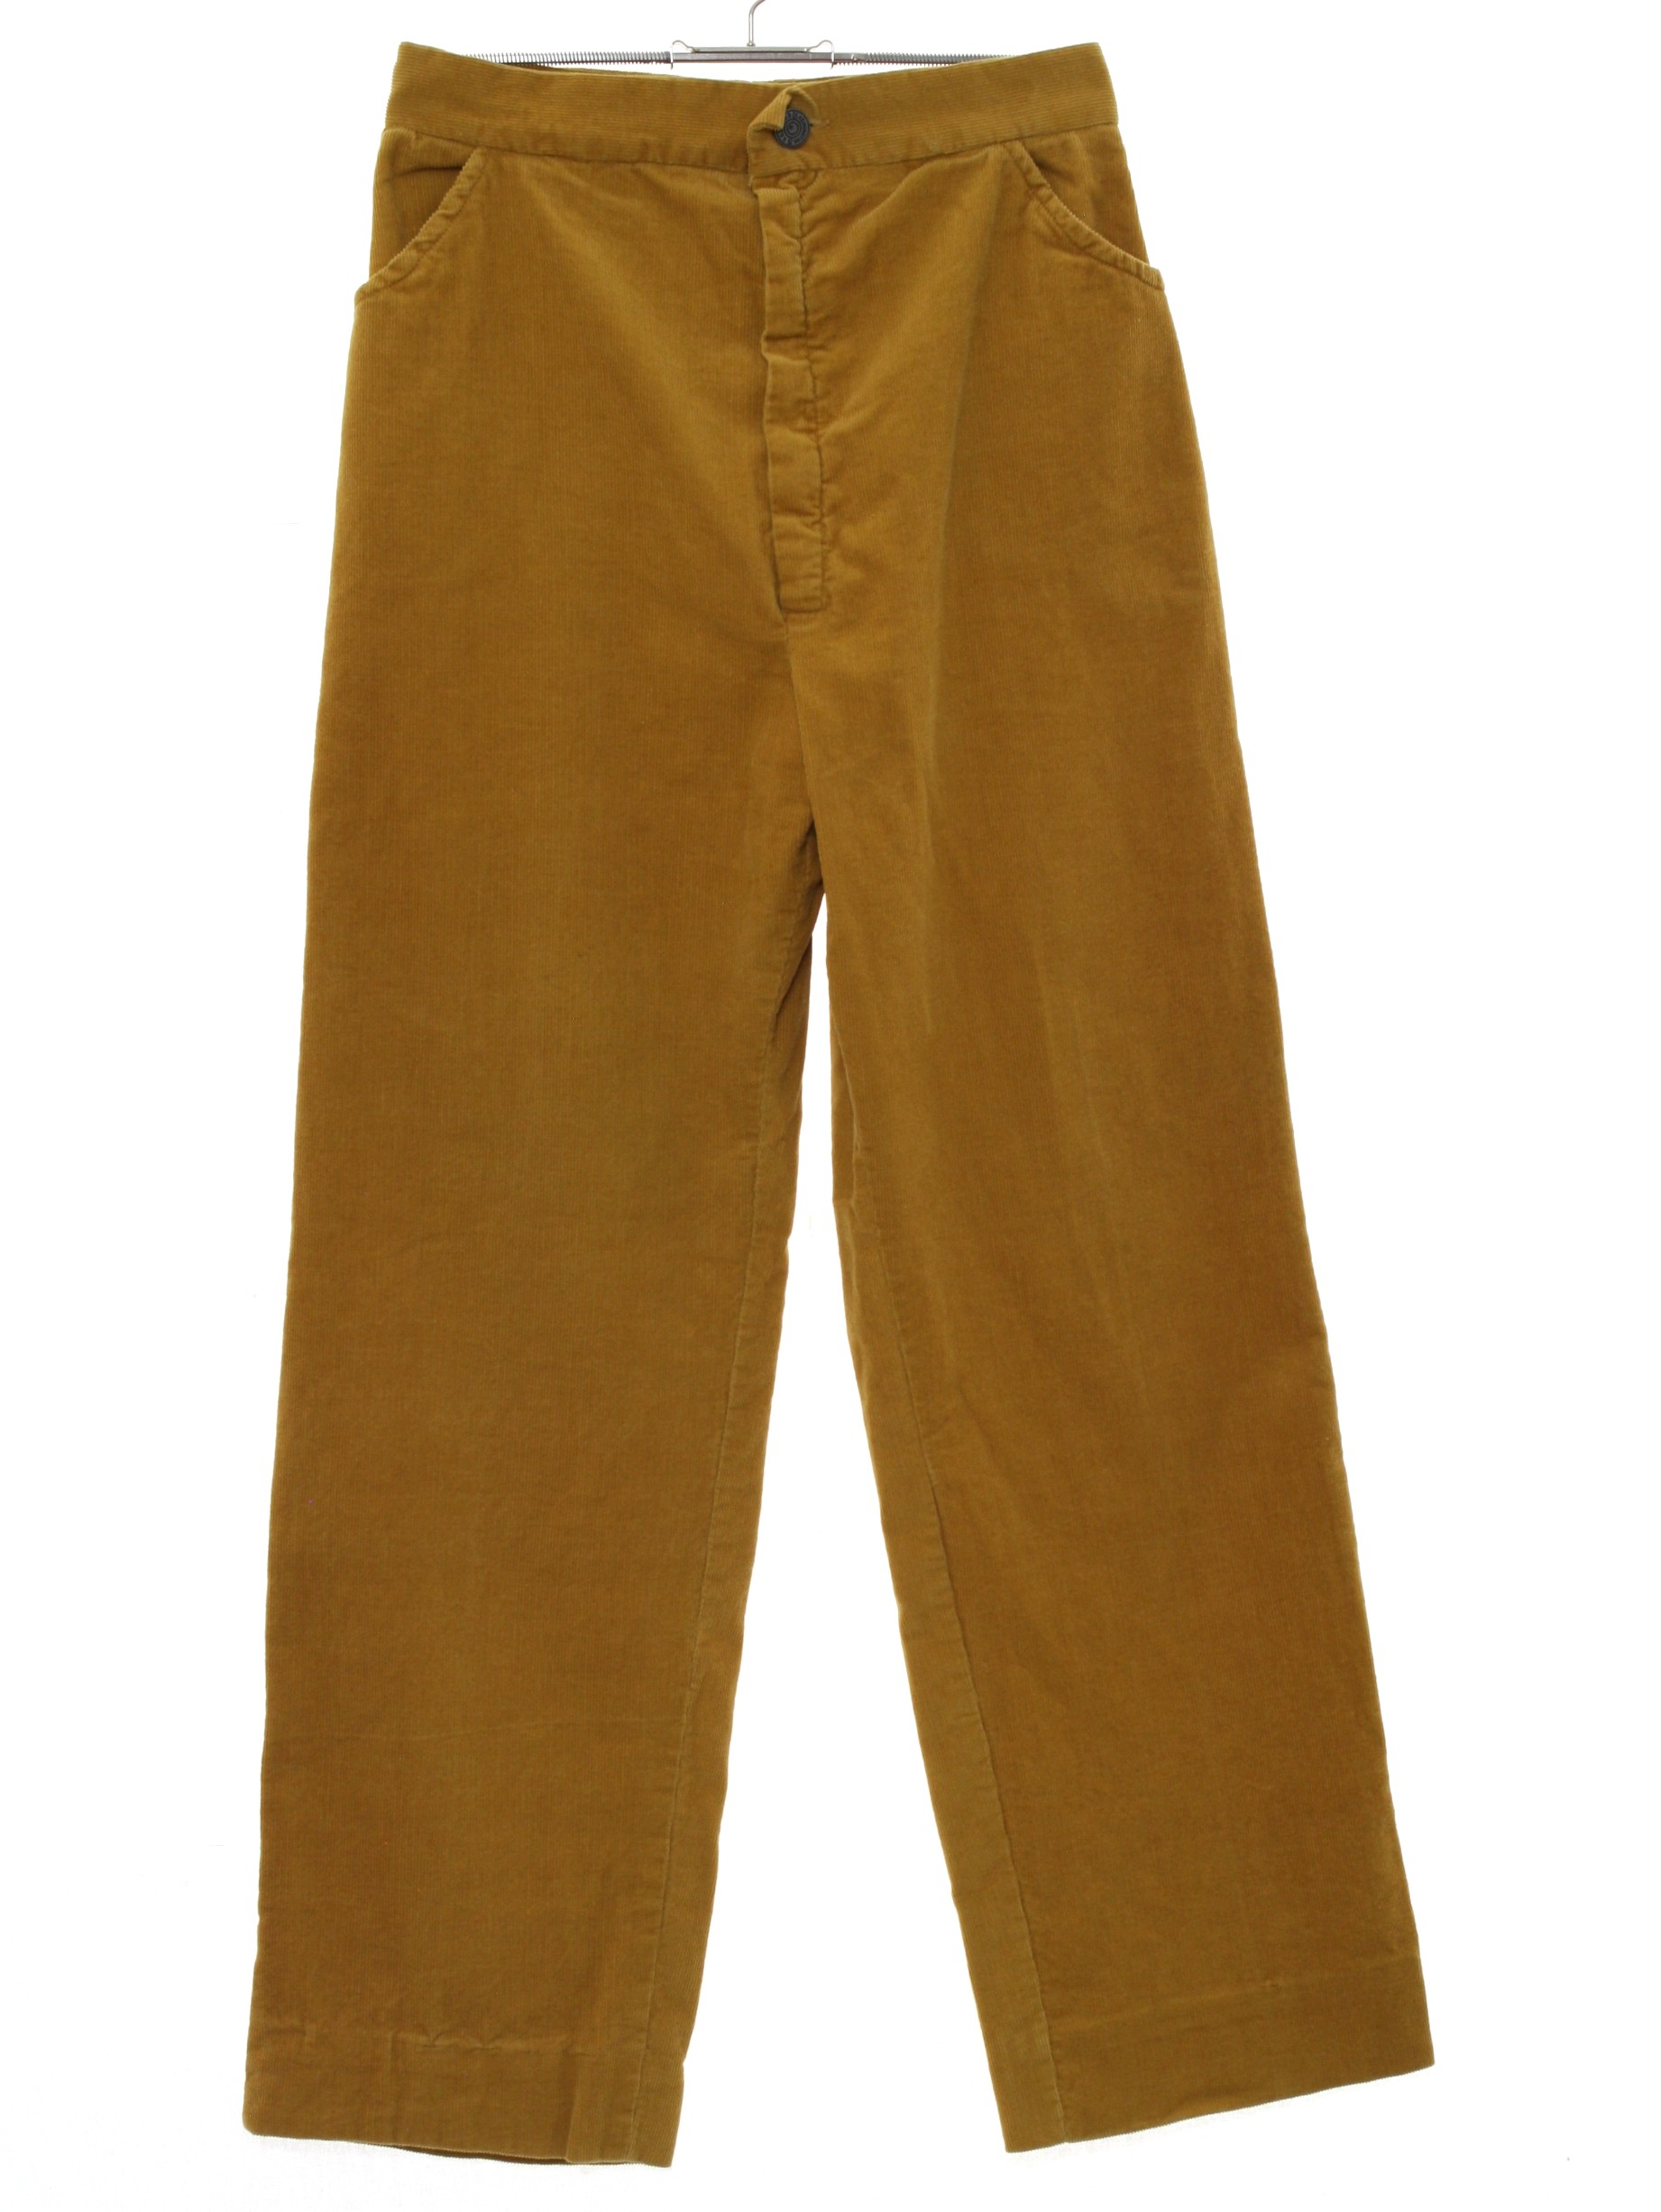 Home Sewn 1970s Vintage Pants: 70s -Home Sewn- Womens mustard yellow ...